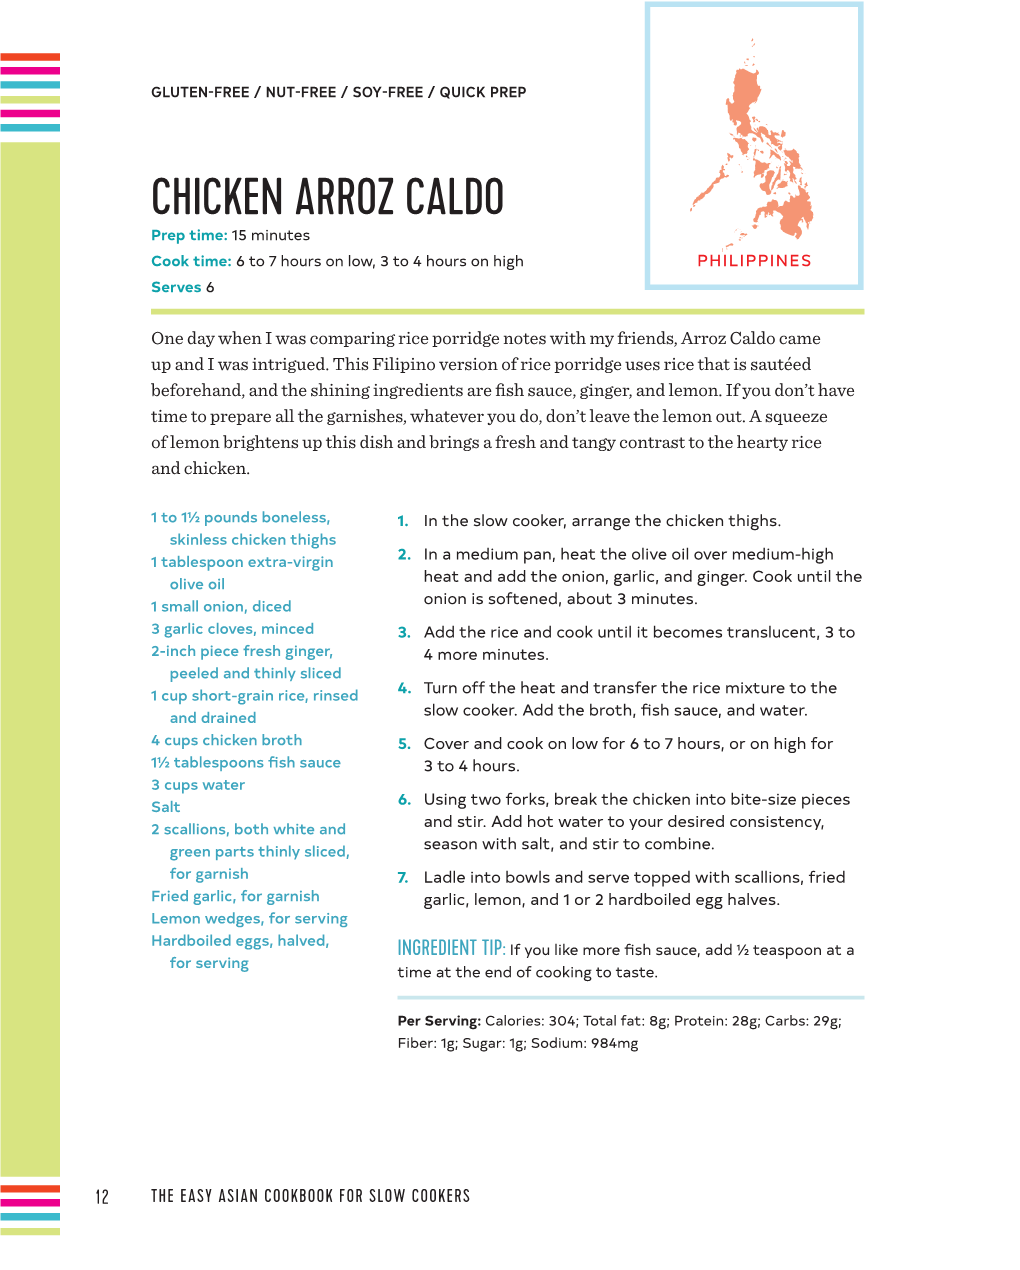 CHICKEN ARROZ CALDO Prep Time: 15 Minutes Cook Time: 6 to 7 Hours on Low, 3 to 4 Hours on High PHILIPPINES Serves 6